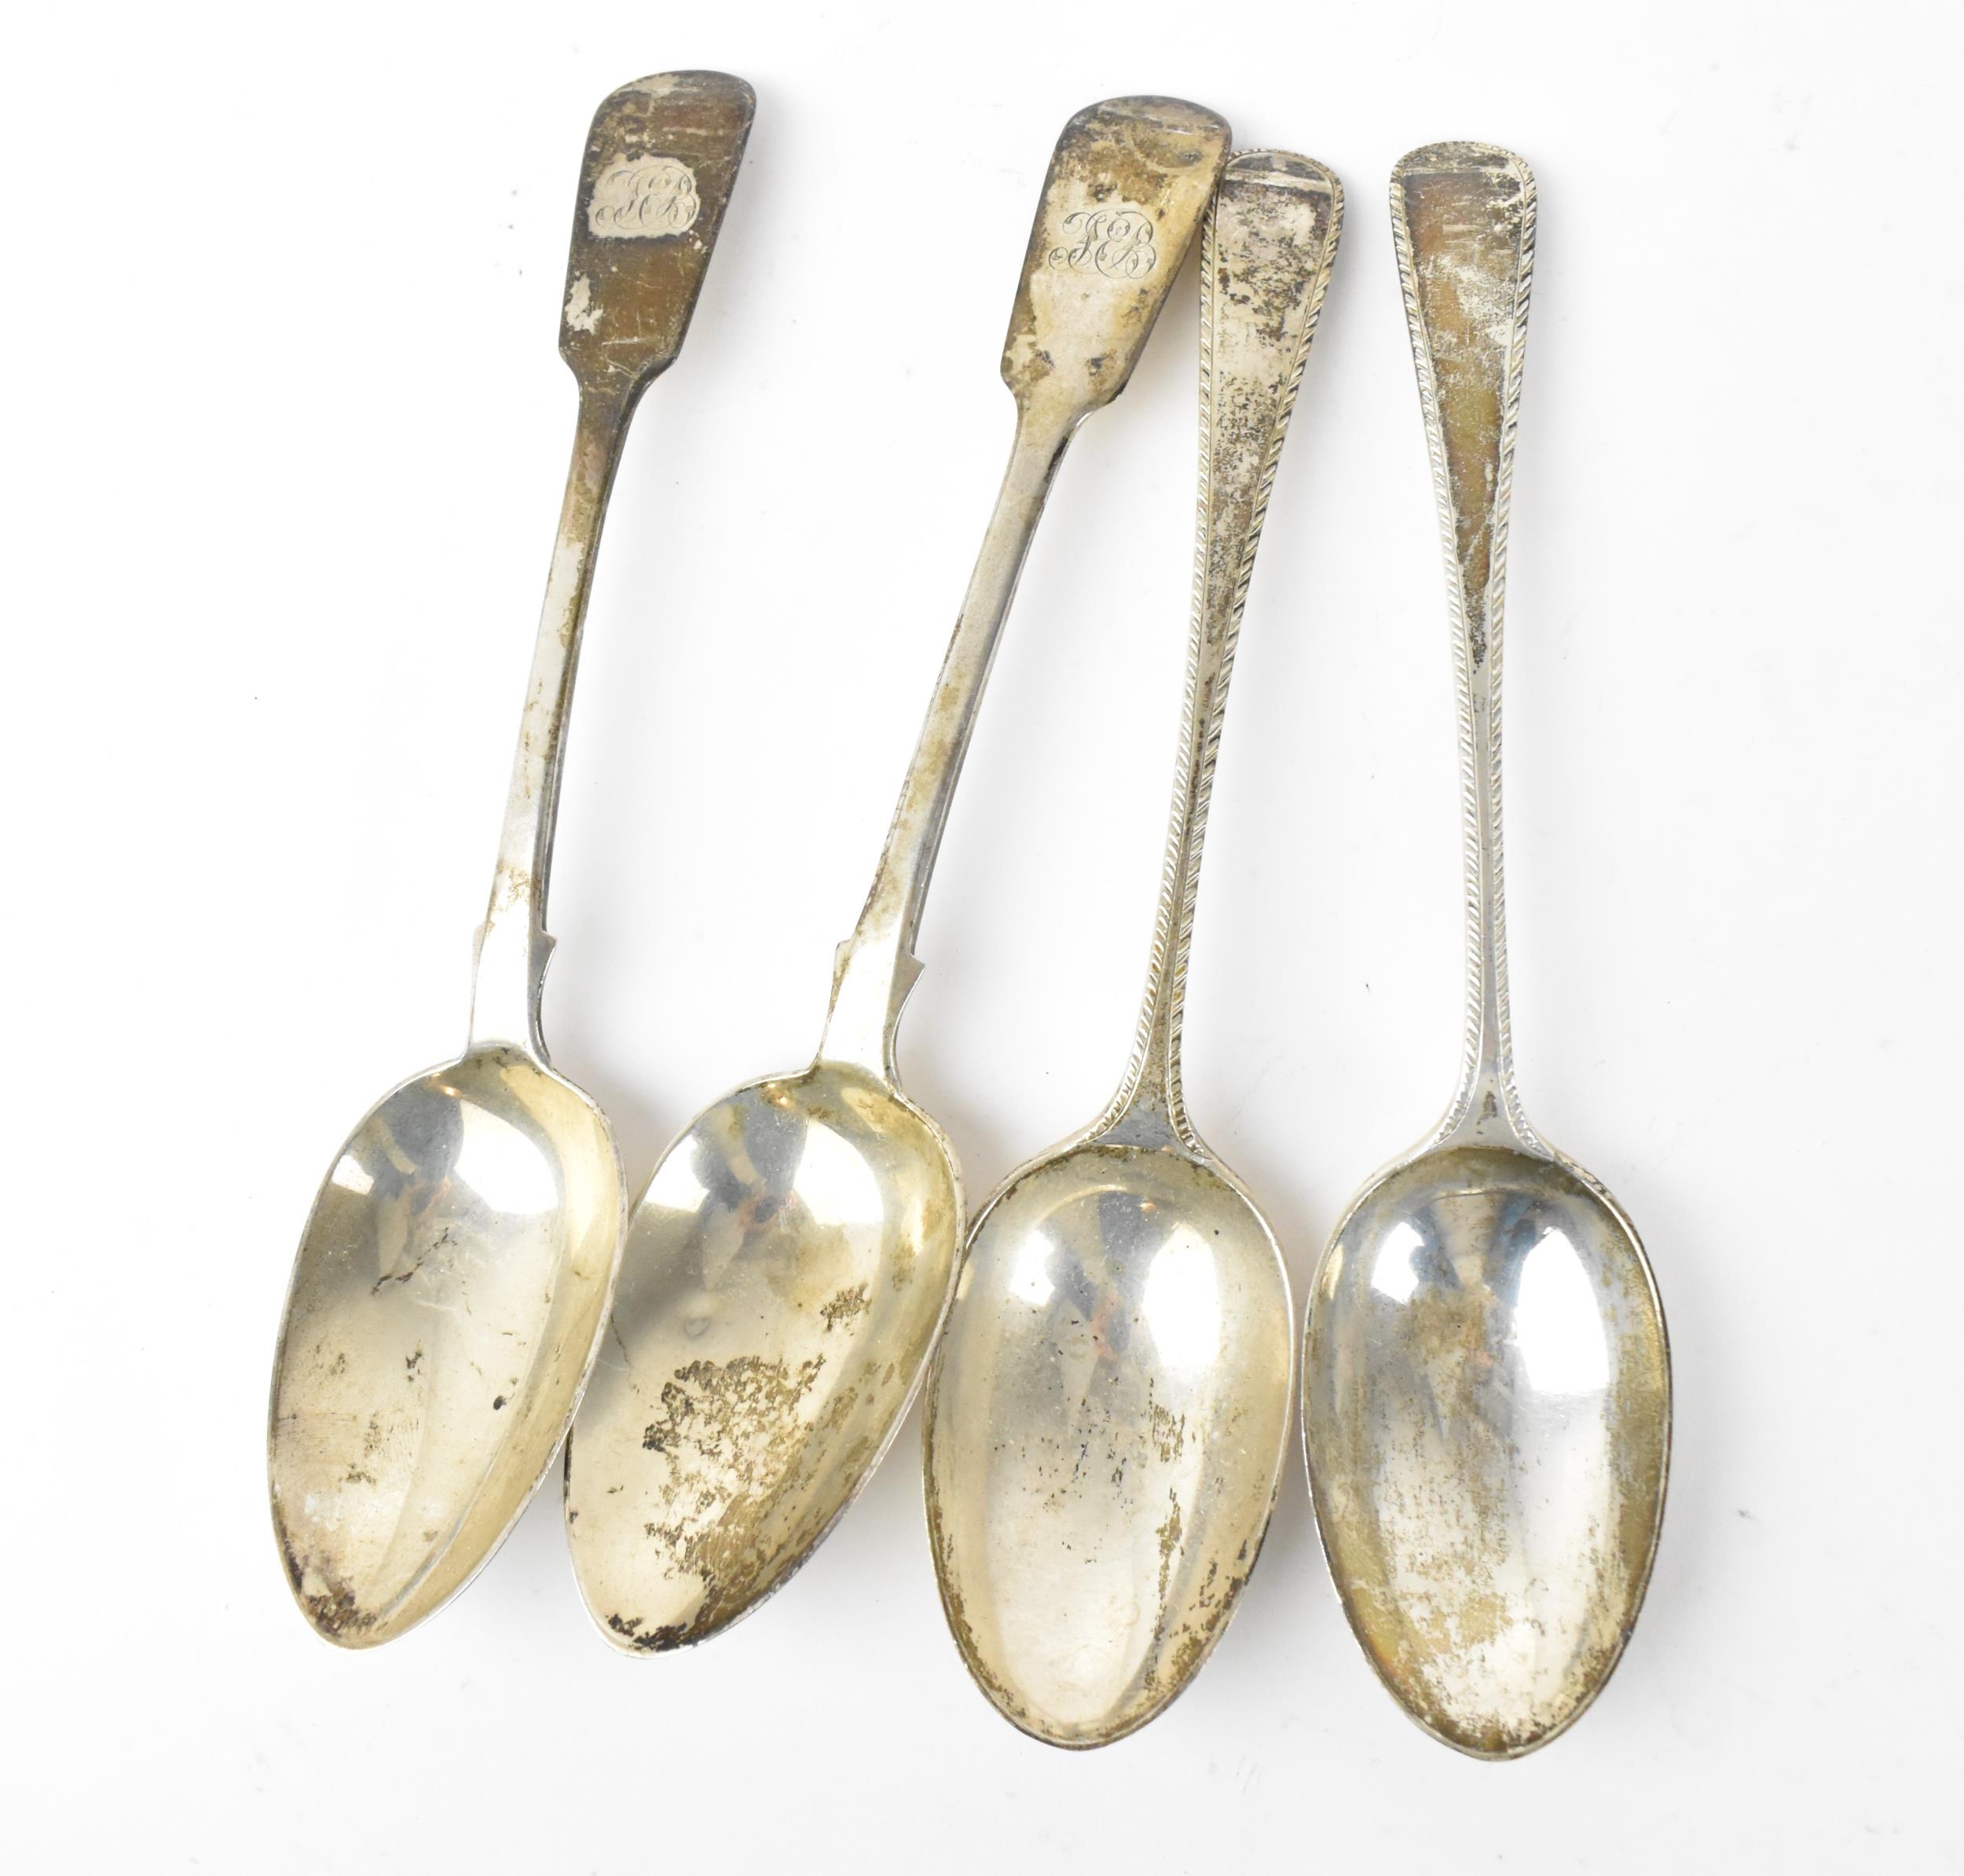 A pair of William IV silver tablespoons by John, Henry & Charles Lias, London 1836, in the fiddle